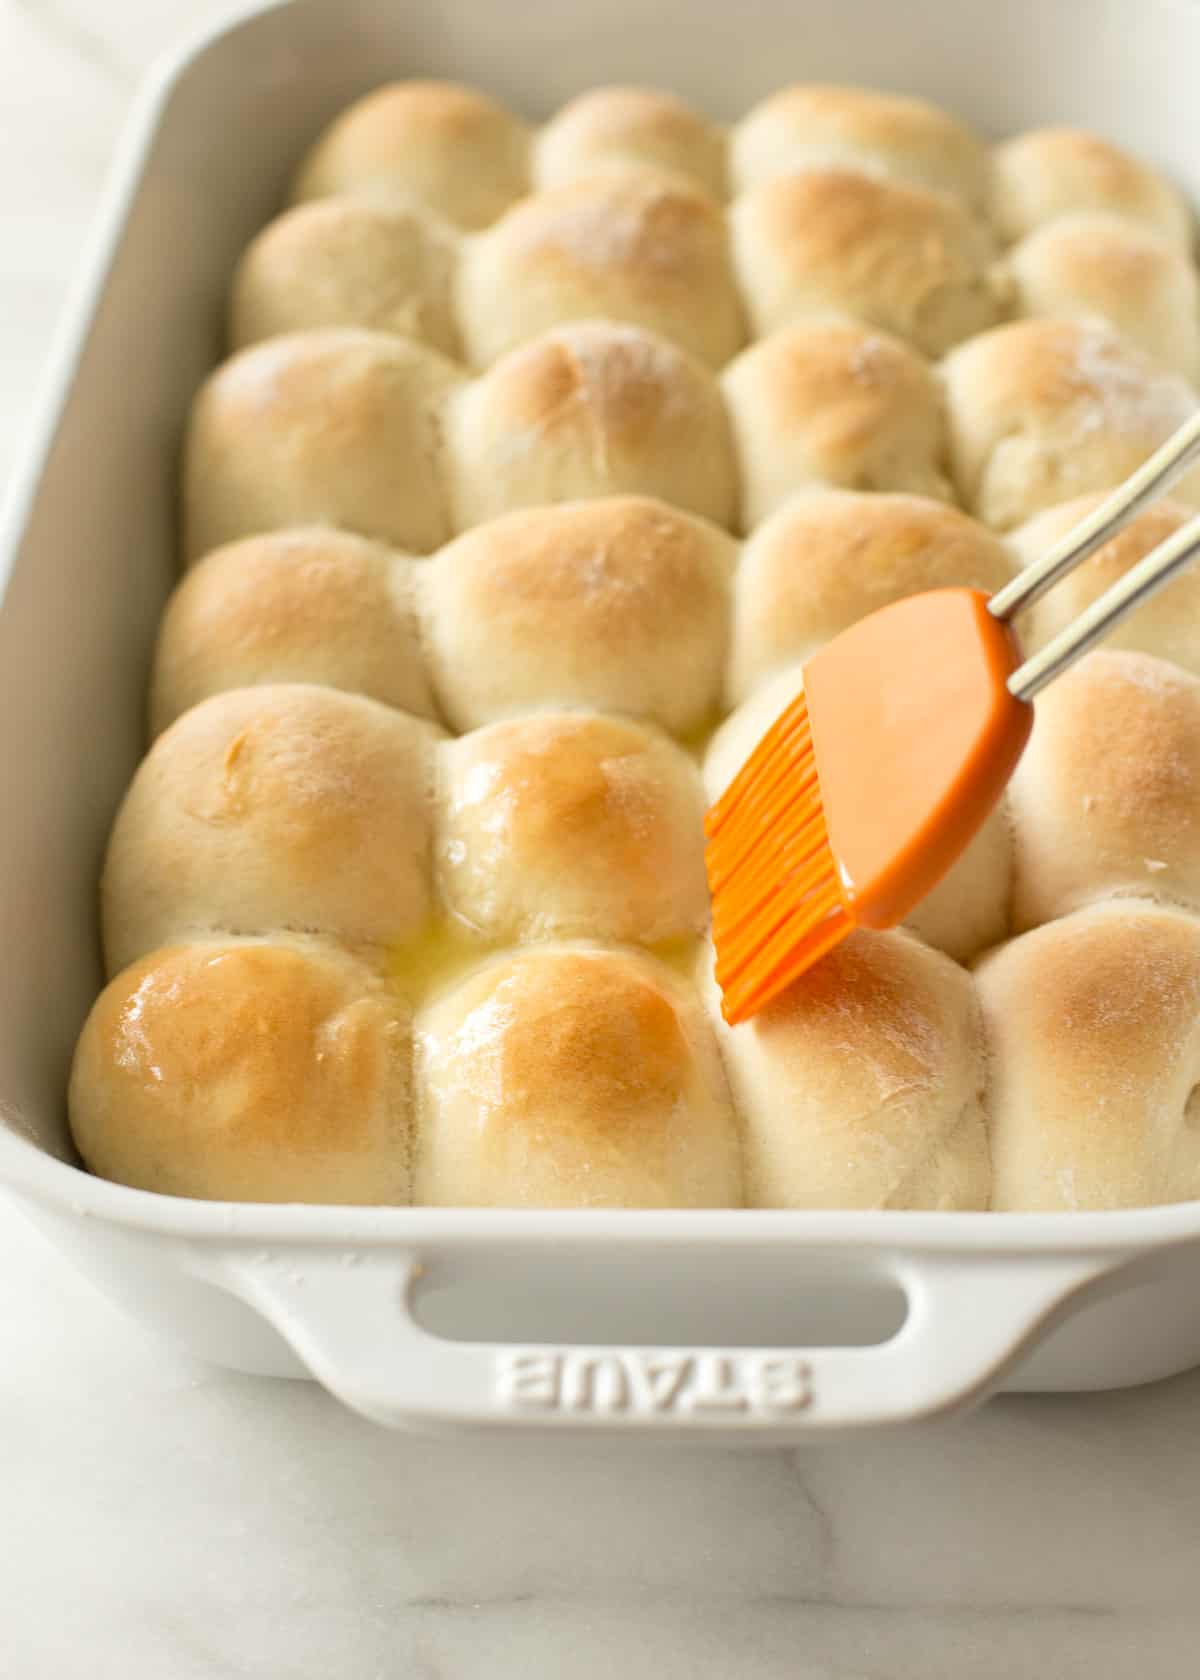 brushing butter on dinner rolls with a silicon basting brush